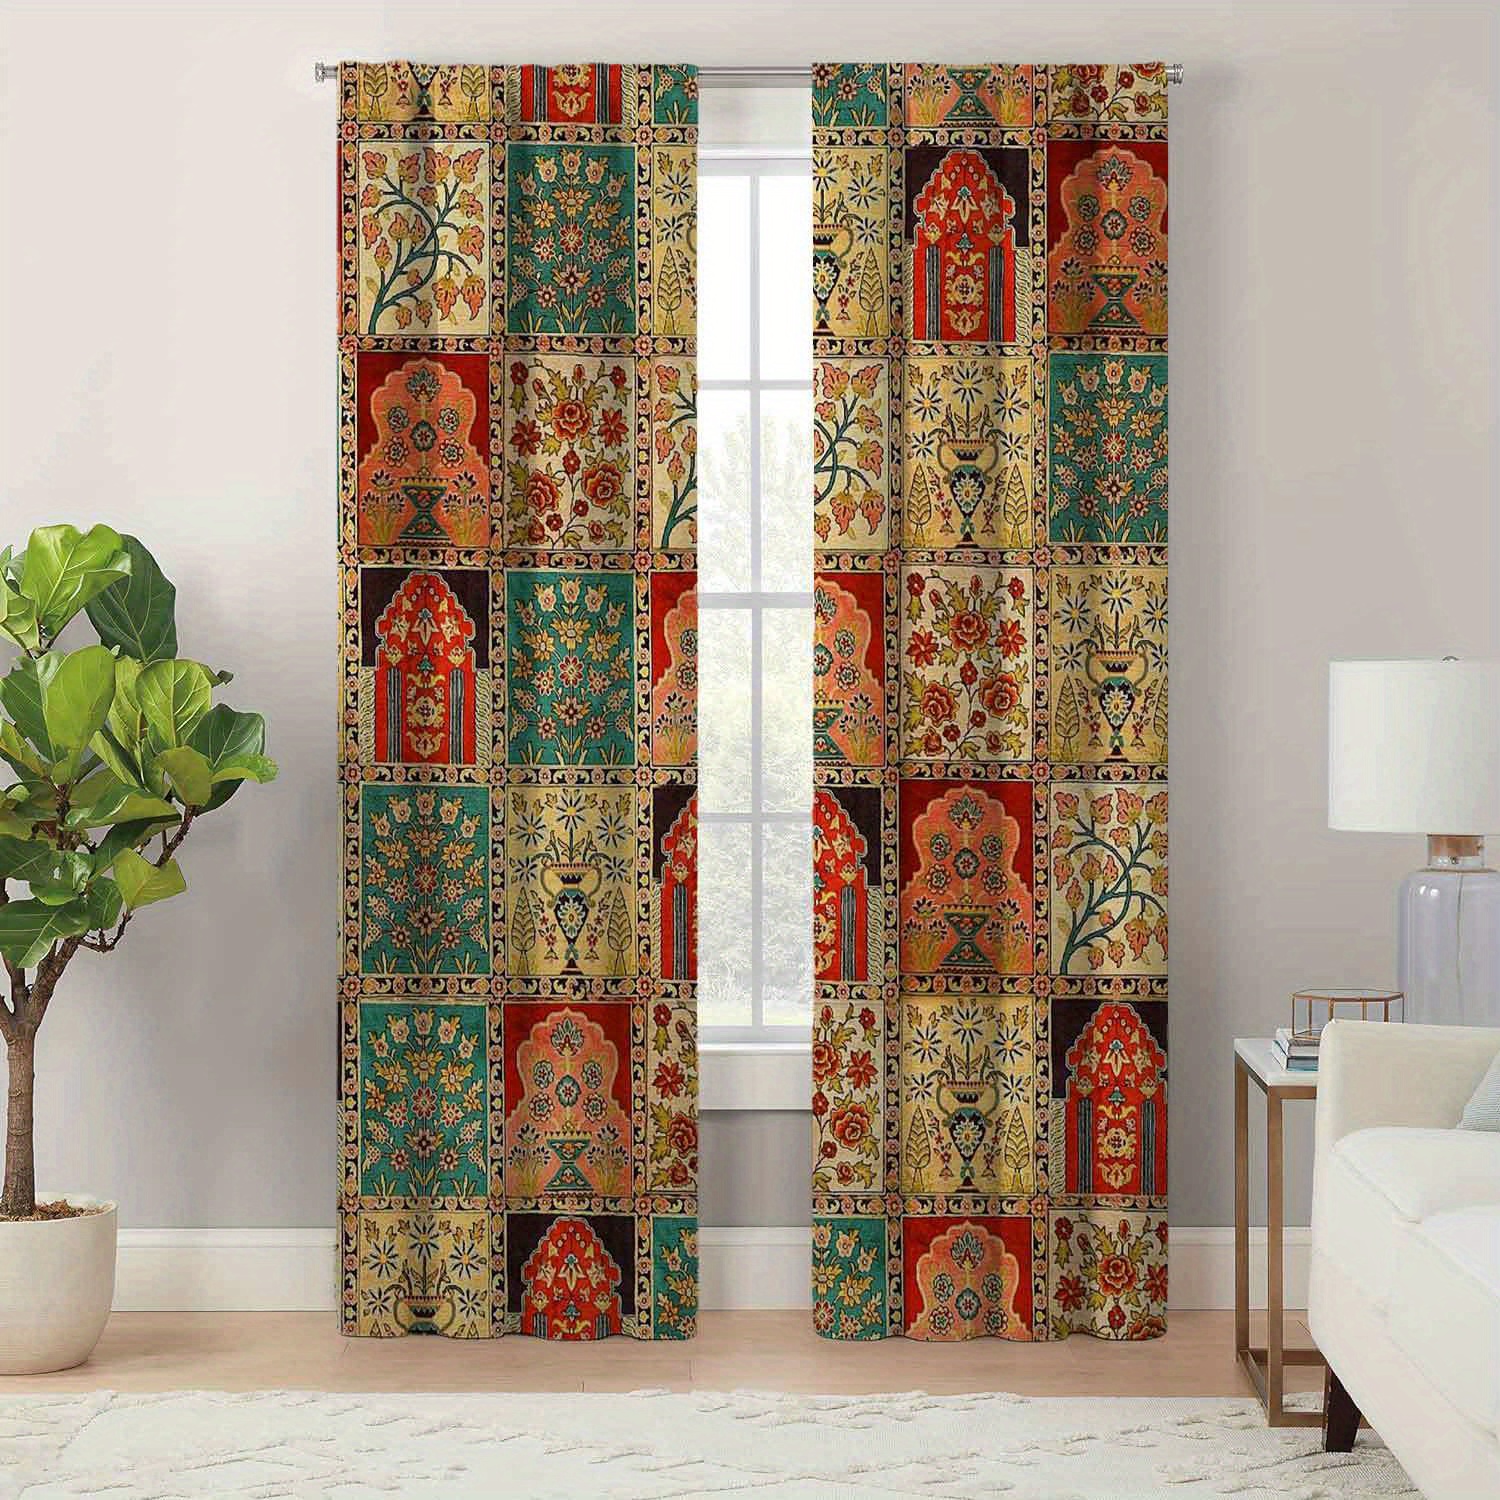 

Boho-chic Vintage Geometric Print Curtains - Easy Care, Perfect For Living Room & Bedroom Decor, Durable Polyester With Tieback Design